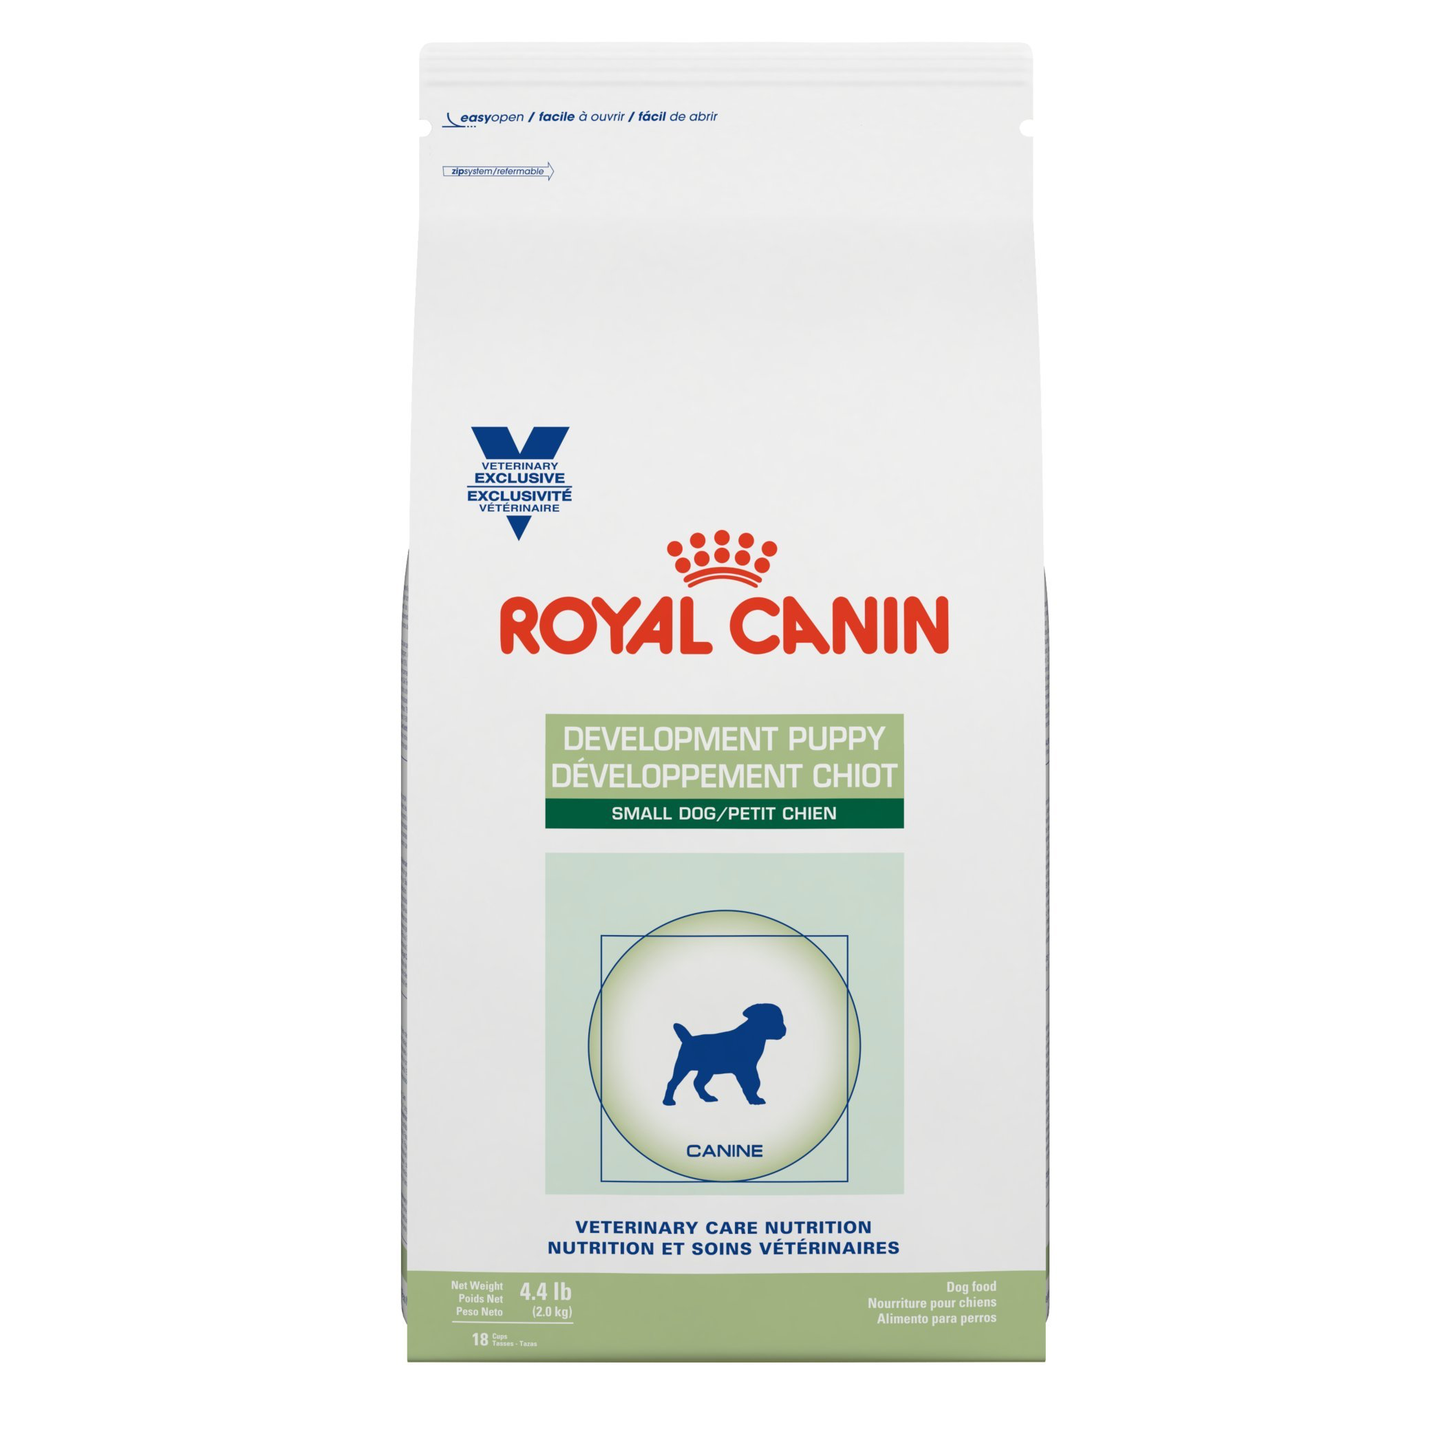 Royal Canin Development Puppy Small Dog - Cani Delights